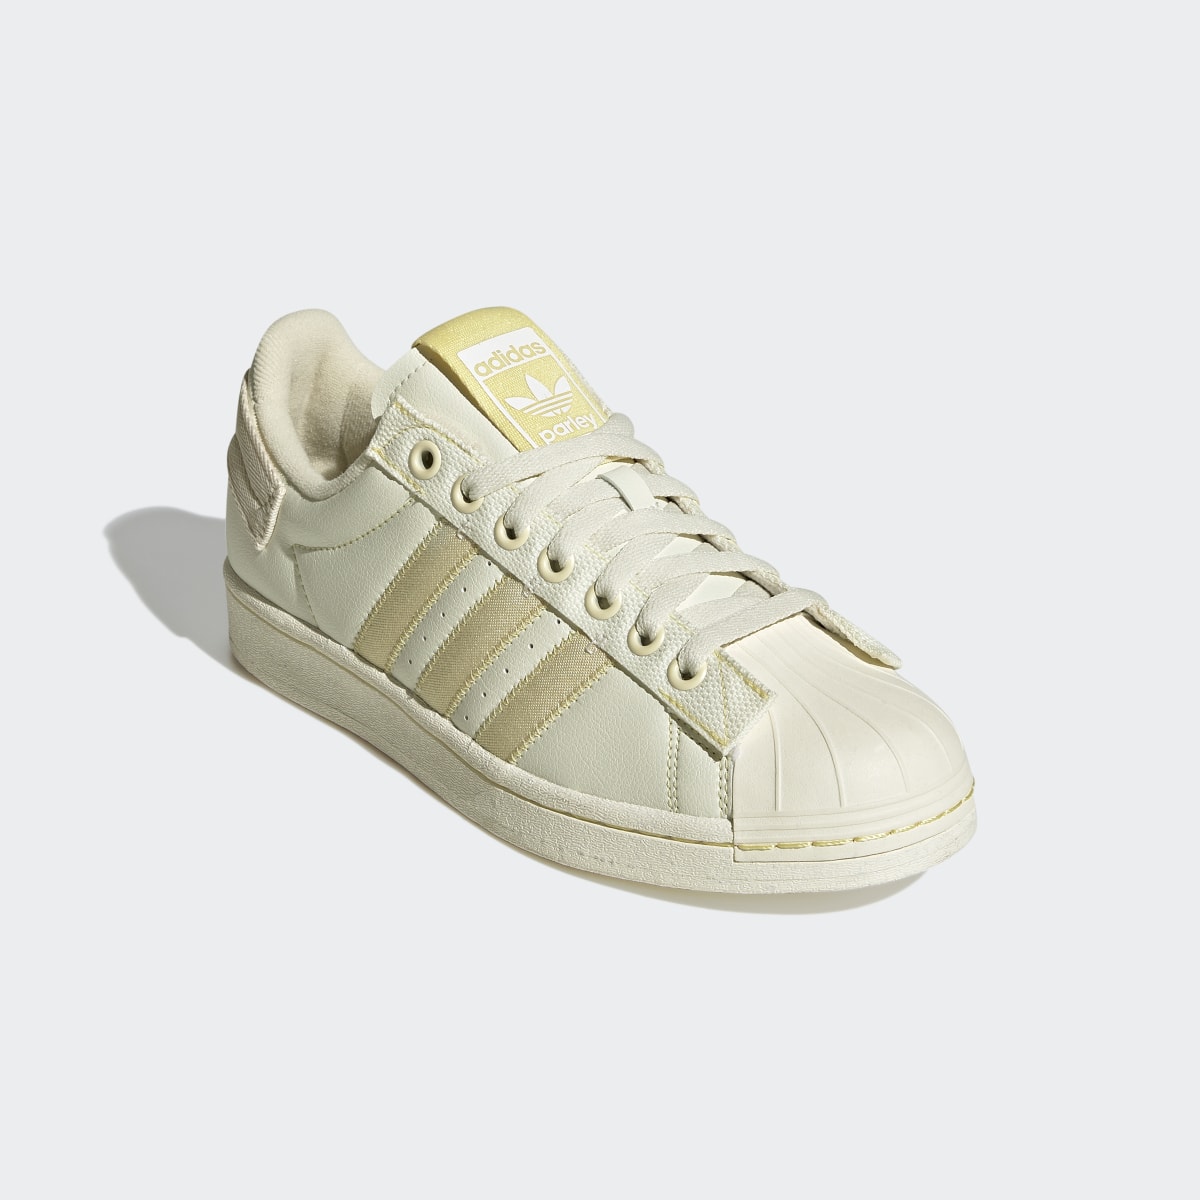 Adidas Superstar Parley Shoes. 8